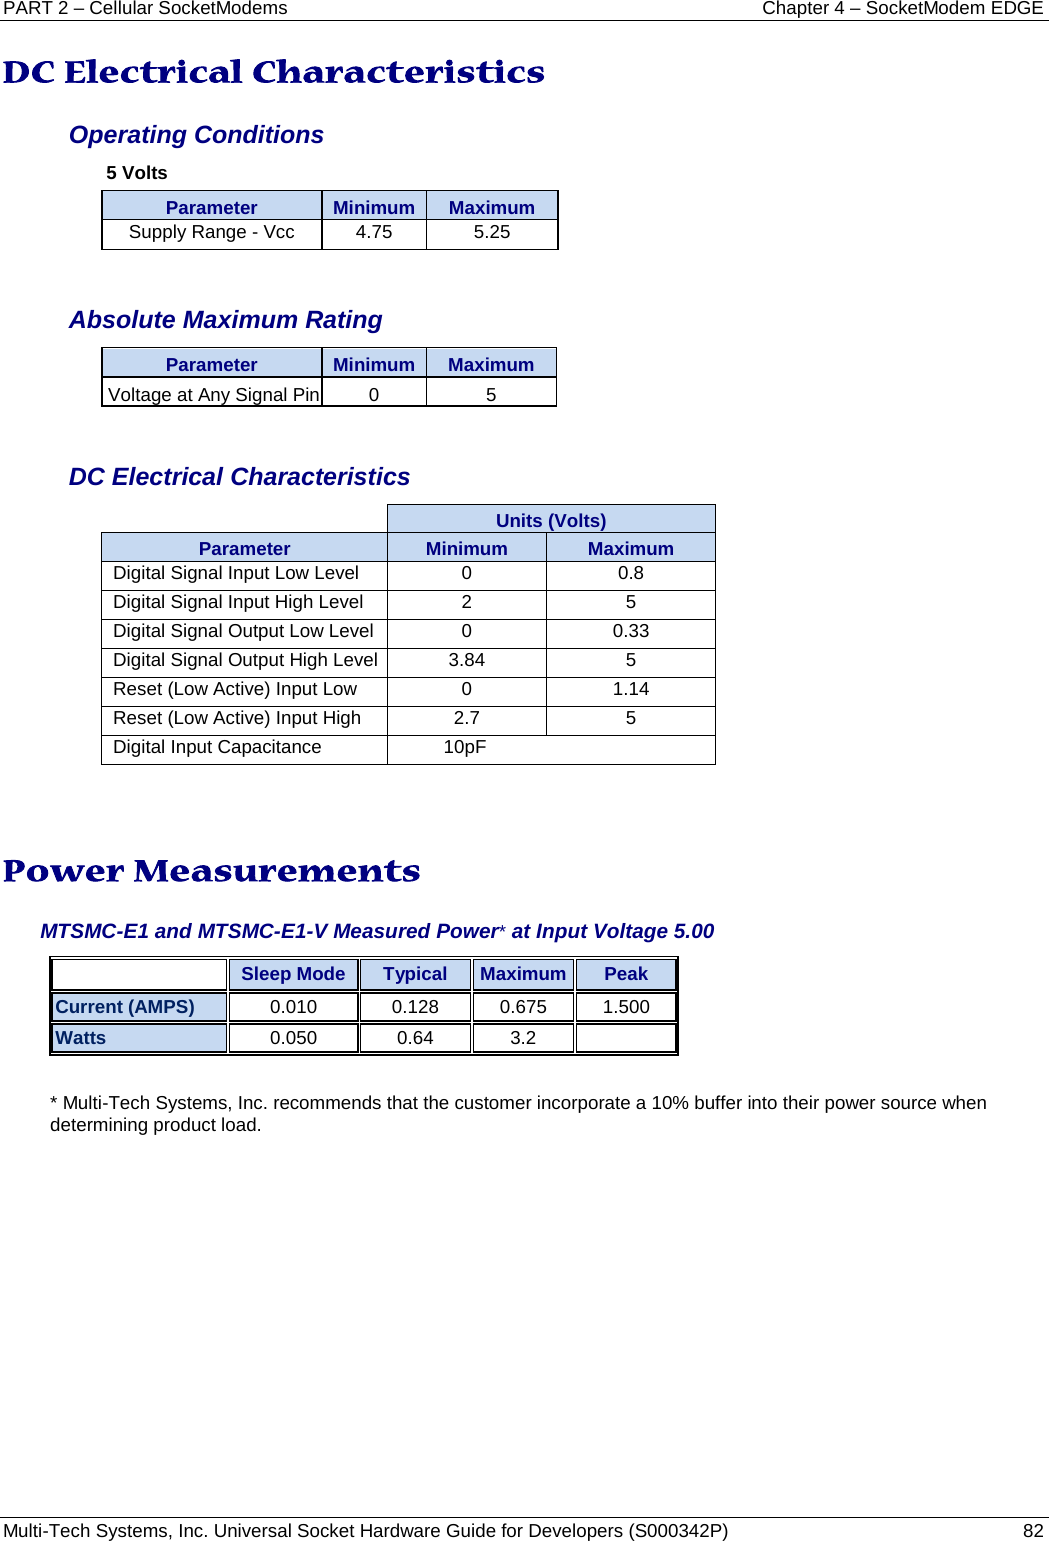 PART 2 – Cellular SocketModems Chapter 4 – SocketModem EDGE Multi-Tech Systems, Inc. Universal Socket Hardware Guide for Developers (S000342P)  82  DC Electrical Characteristics  Operating Conditions 5 Volts Parameter Minimum Maximum Supply Range - Vcc 4.75 5.25   Absolute Maximum Rating Parameter Minimum Maximum Voltage at Any Signal Pin 0 5   DC Electrical Characteristics    Units (Volts) Parameter Minimum Maximum Digital Signal Input Low Level 0 0.8 Digital Signal Input High Level 2 5 Digital Signal Output Low Level 0 0.33 Digital Signal Output High Level 3.84 5 Reset (Low Active) Input Low 0 1.14 Reset (Low Active) Input High 2.7 5 Digital Input Capacitance 10pF    Power Measurements  MTSMC-E1 and MTSMC-E1-V Measured Power* at Input Voltage 5.00   Sleep Mode Typical Maximum Peak Current (AMPS) 0.010 0.128 0.675 1.500 Watts 0.050 0.64 3.2    * Multi-Tech Systems, Inc. recommends that the customer incorporate a 10% buffer into their power source when determining product load.    